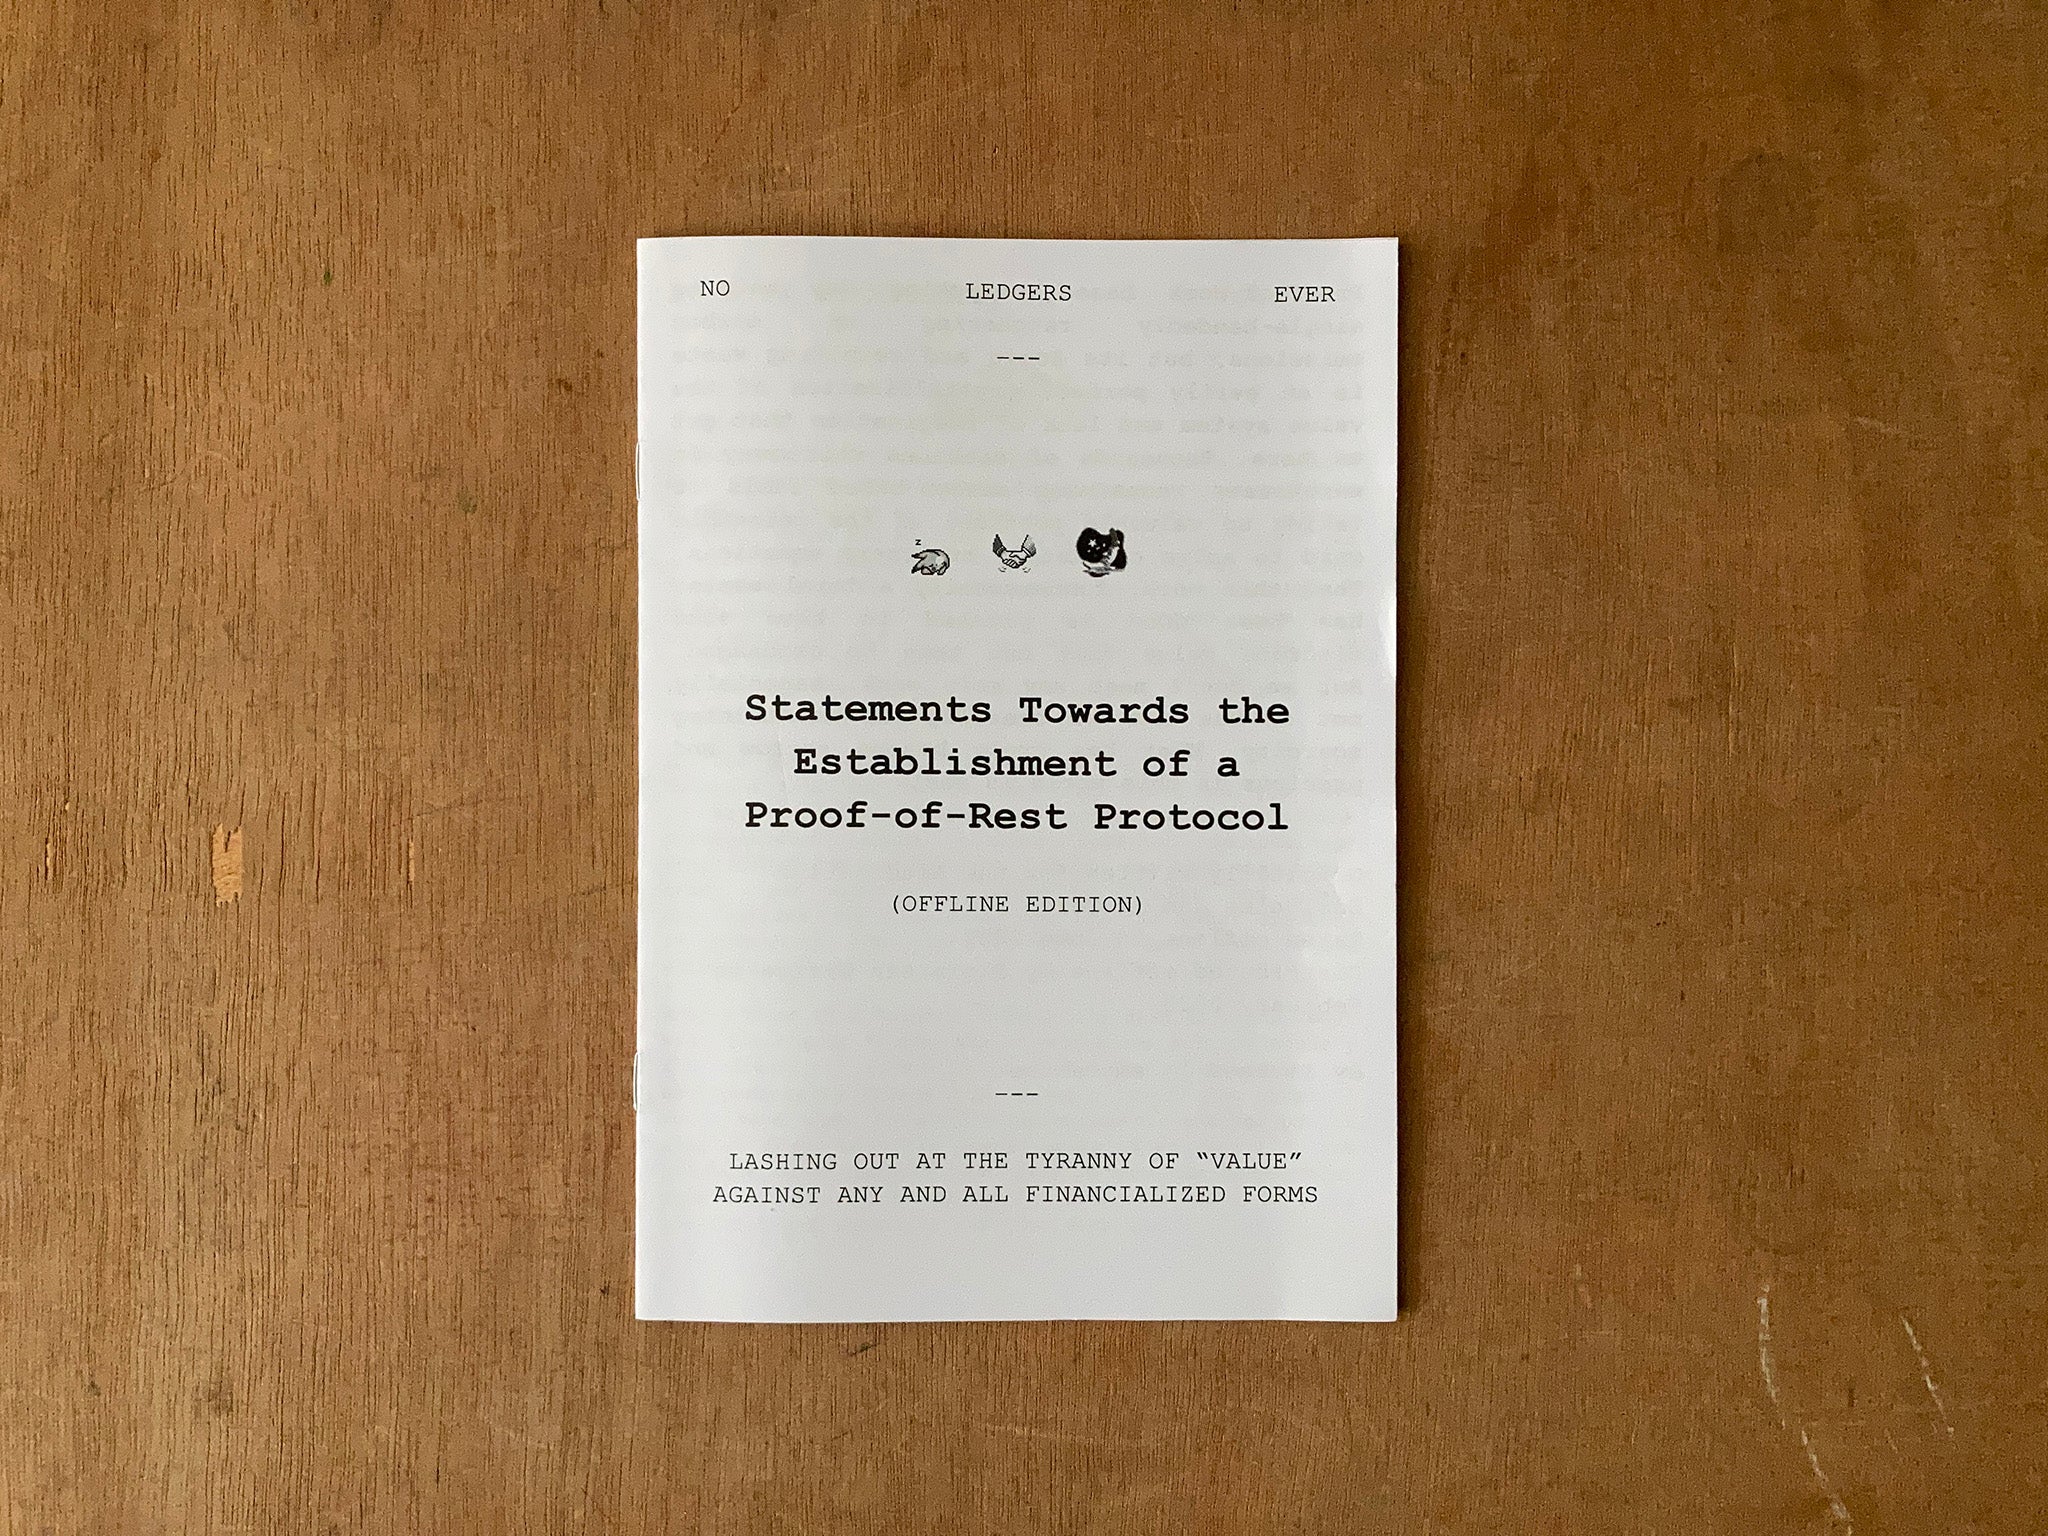 STATEMENTS TOWARDS THE ESTABLISHMENT OF A PROOF-OF-REST PROTOCOL (OFFLINE EDITION) by Em Reed